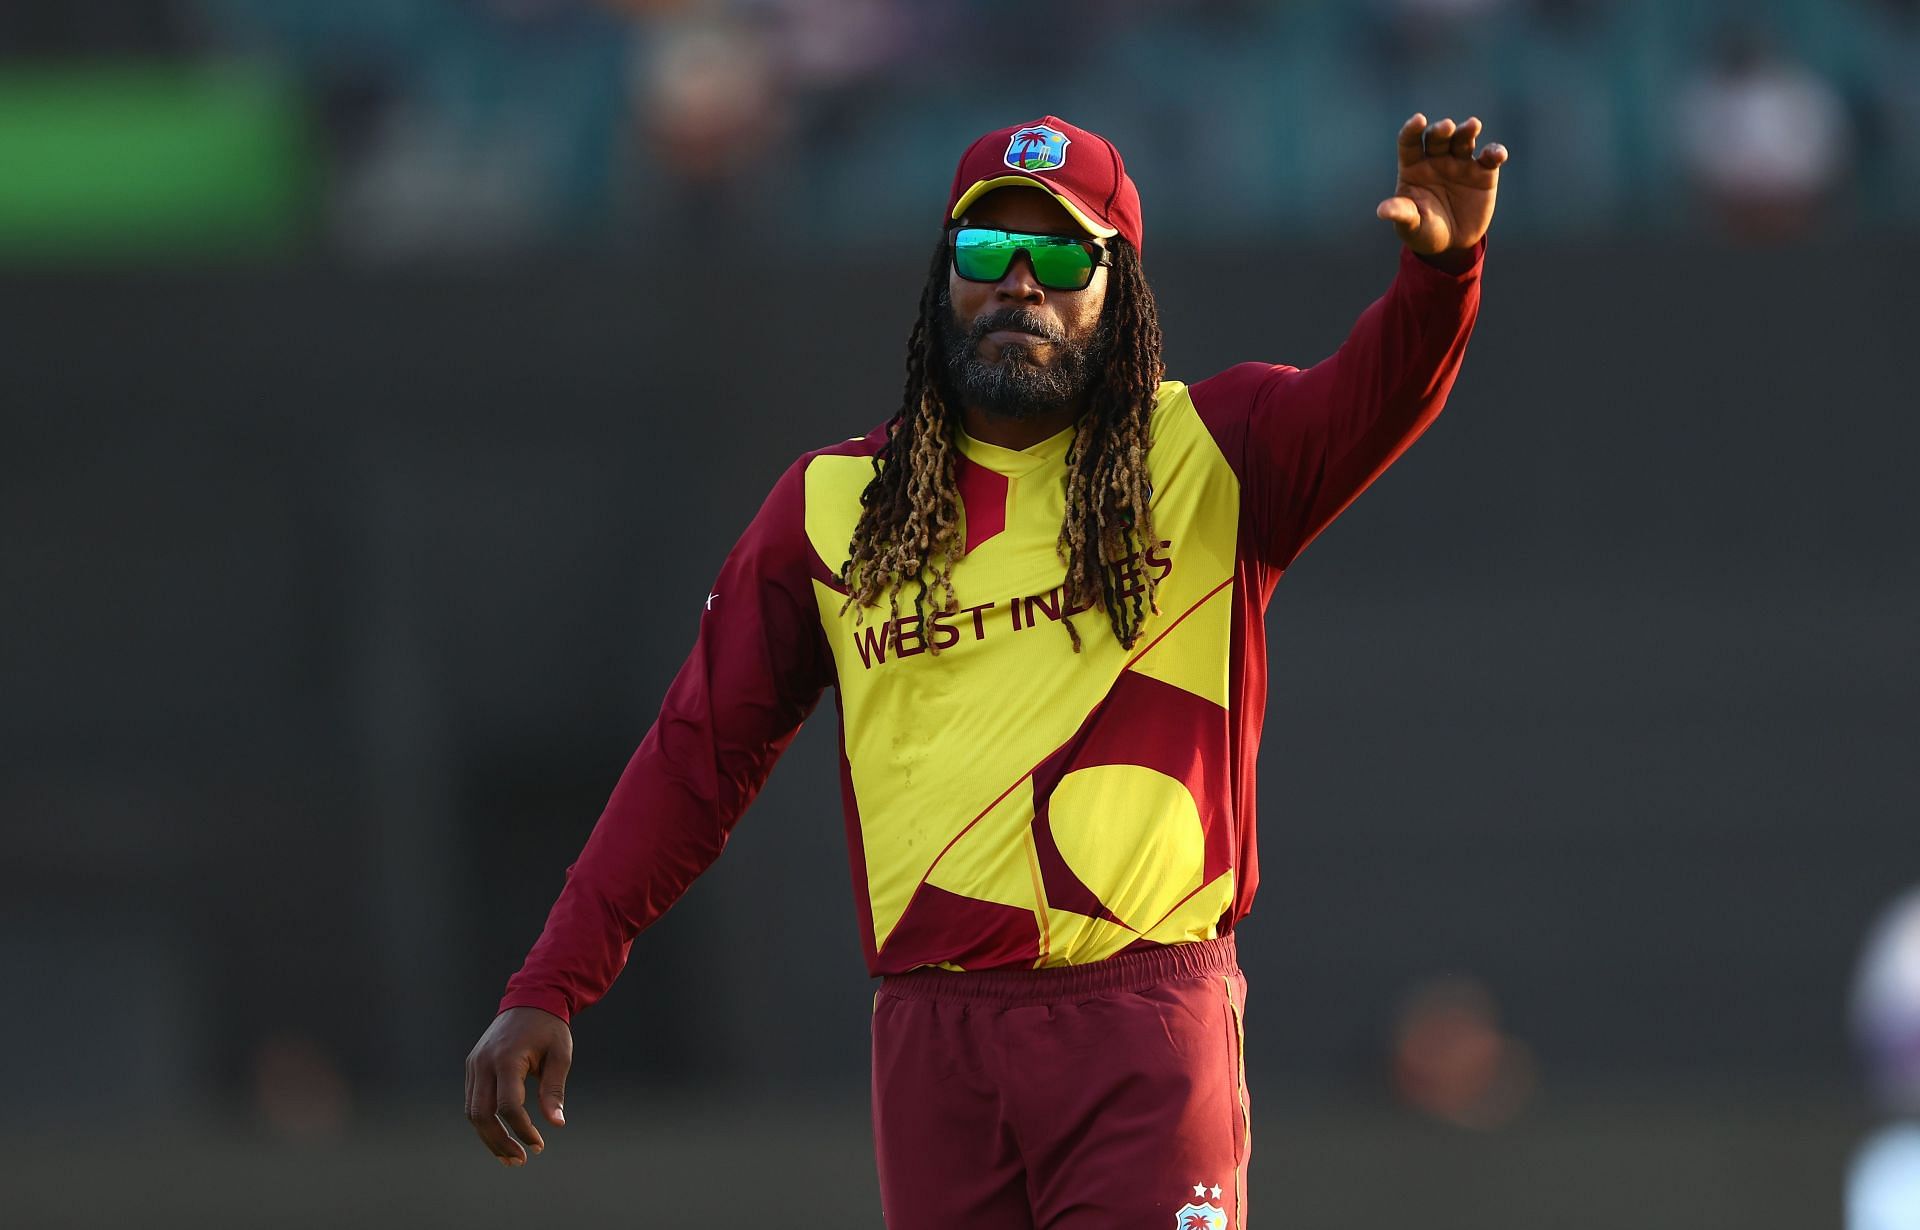 West Indies legend Chris Gayle will be one of many players fans will be eager to watch at Legends League Cricket 2022.